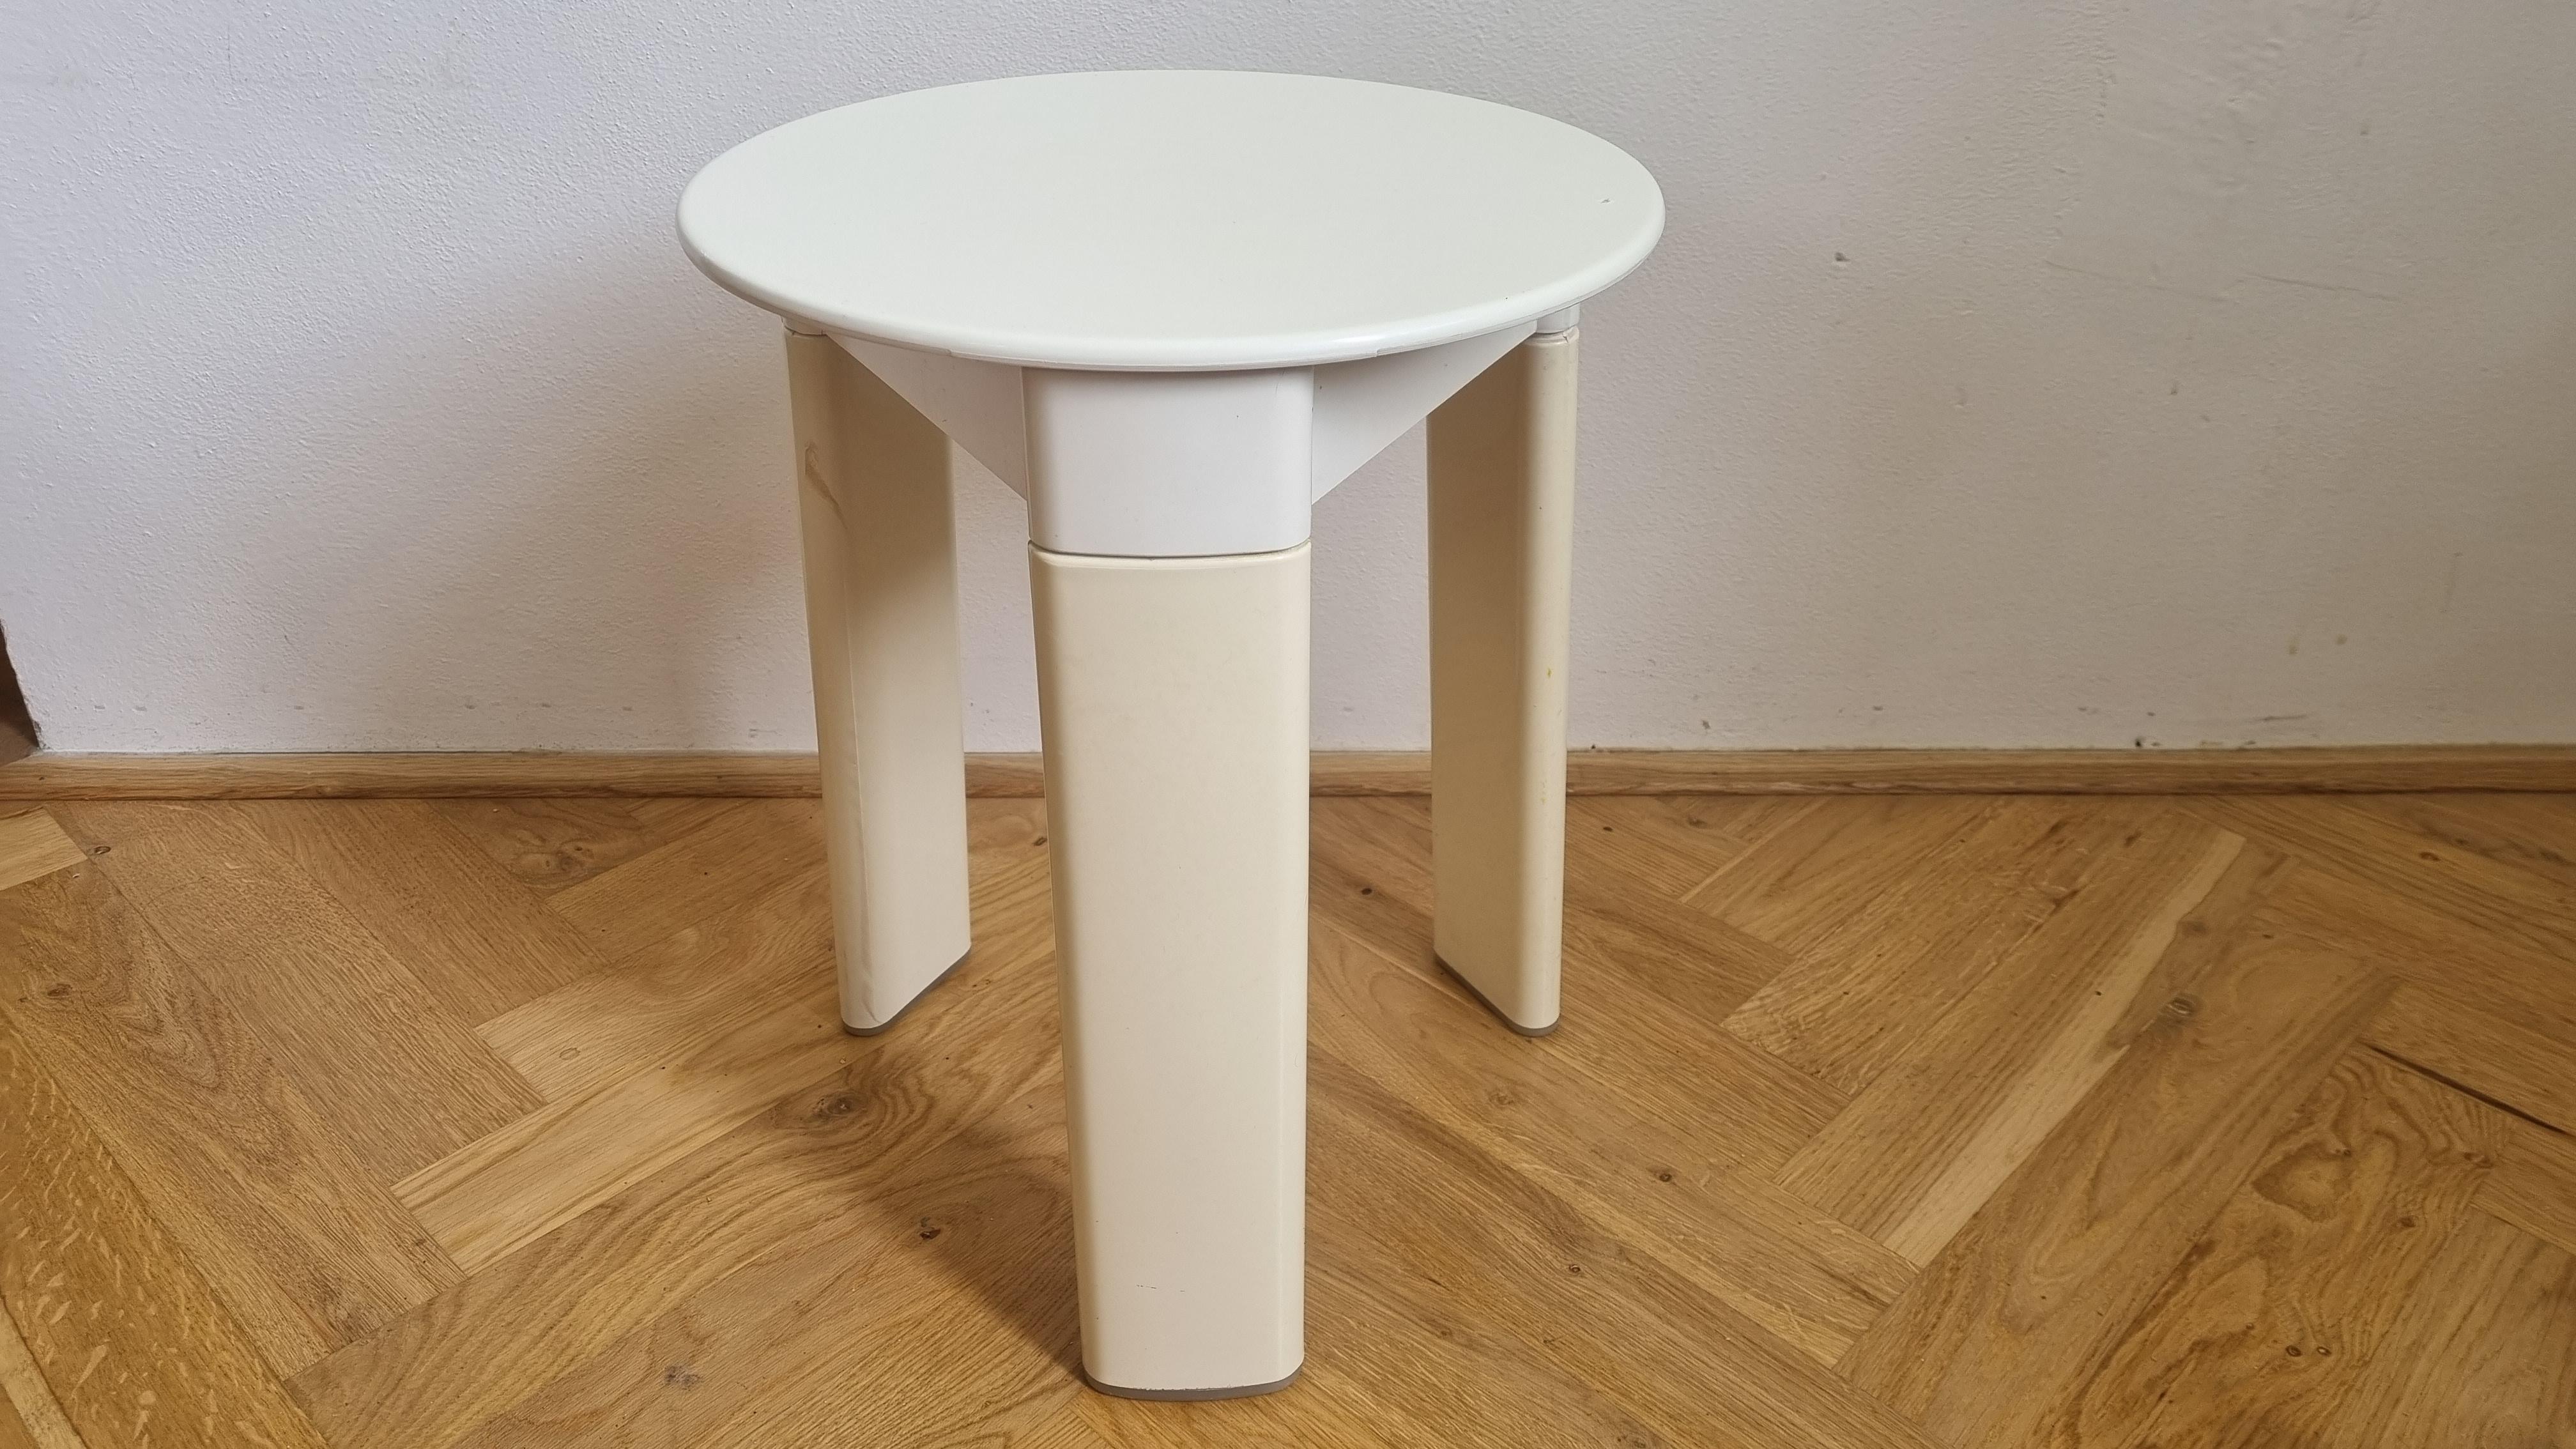 Midcentury Stool or Side Table Trio, Olaf Von Bohr for Gedy, Italy, 1970s For Sale 10